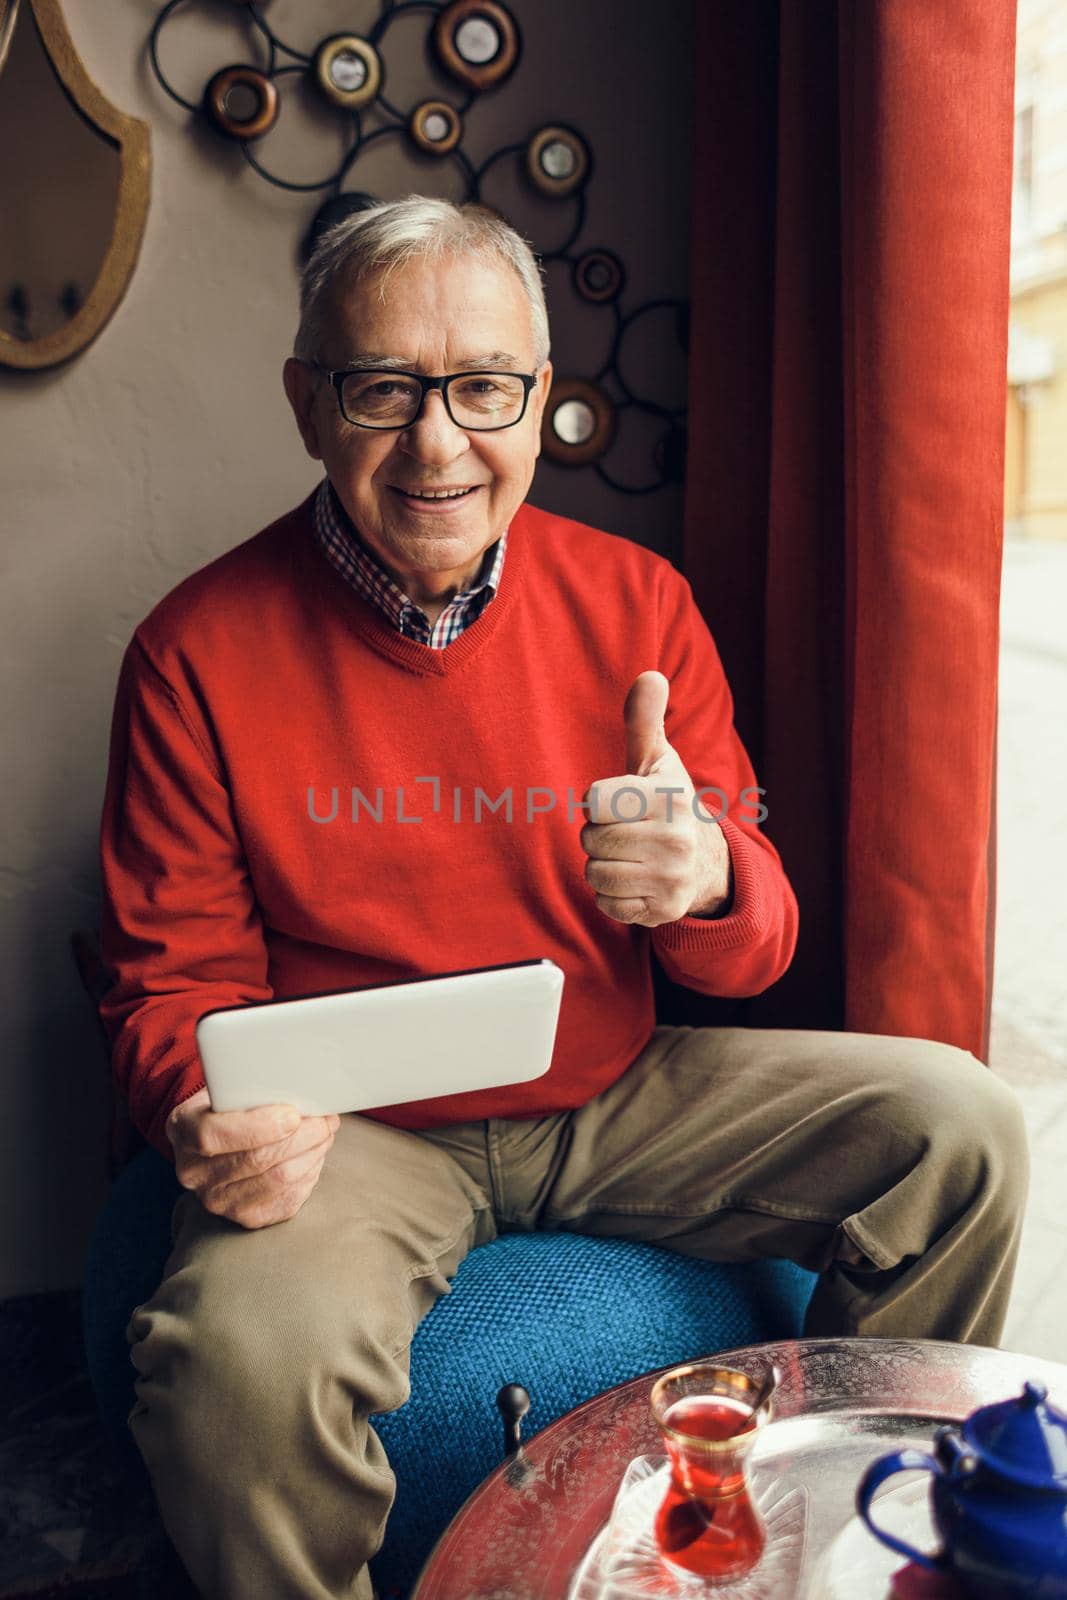 Portrait of happy senior man who is using digital tablet in a cafe.